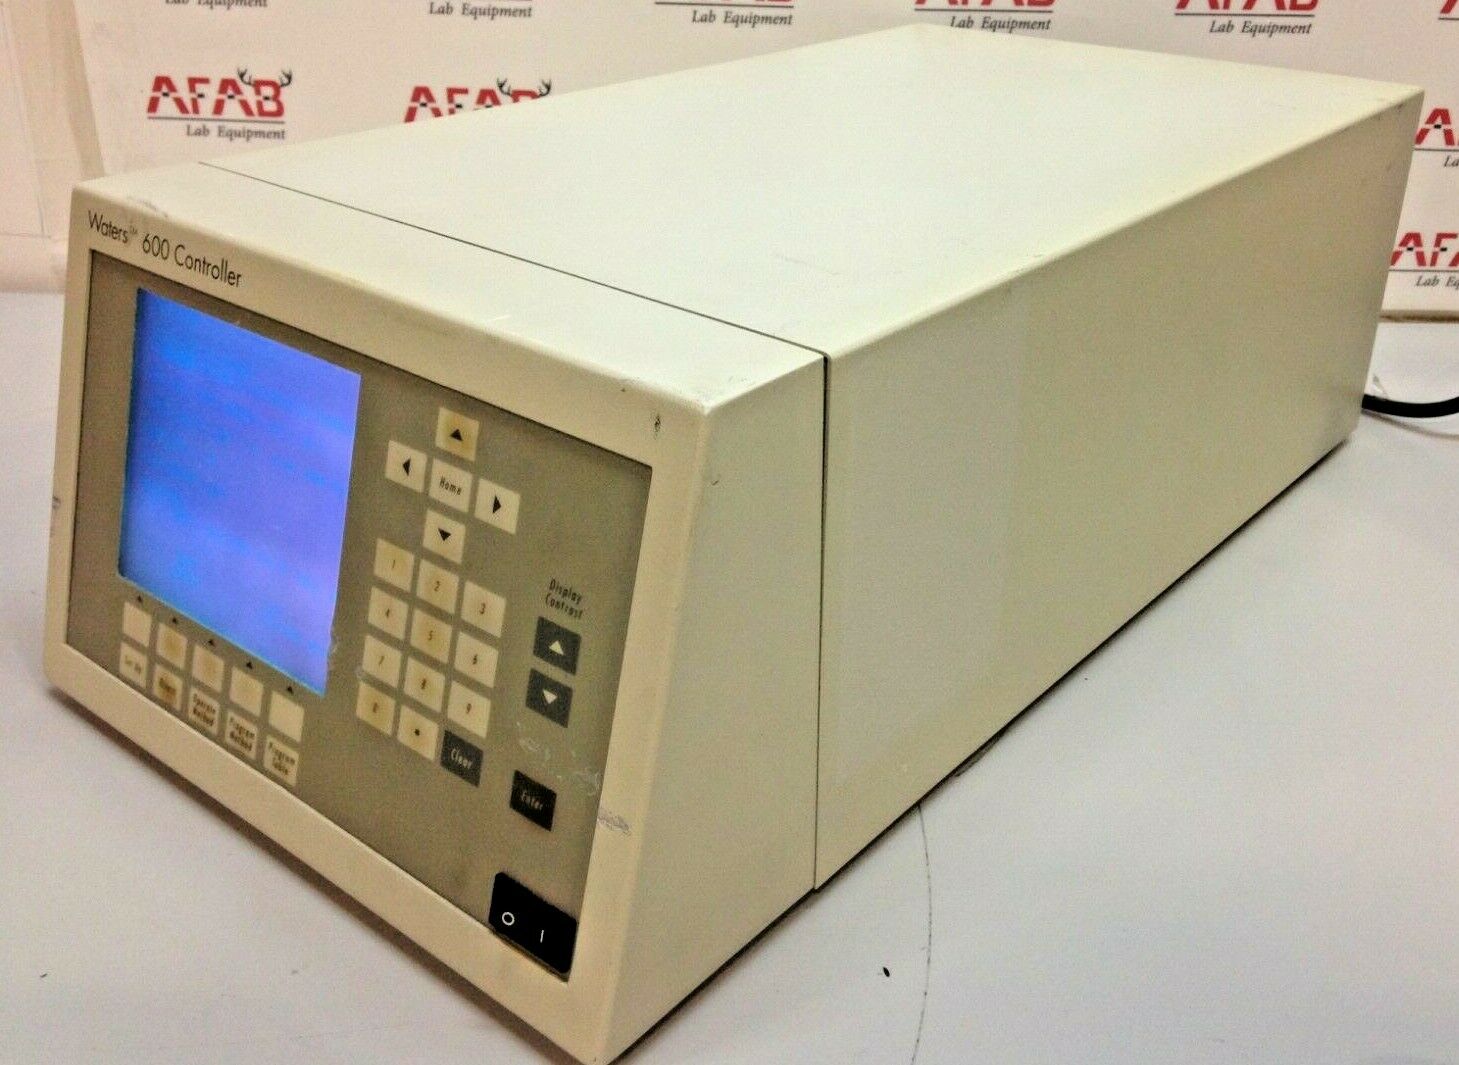 waters-600-6ce-pump-controller-afab-lab-resources